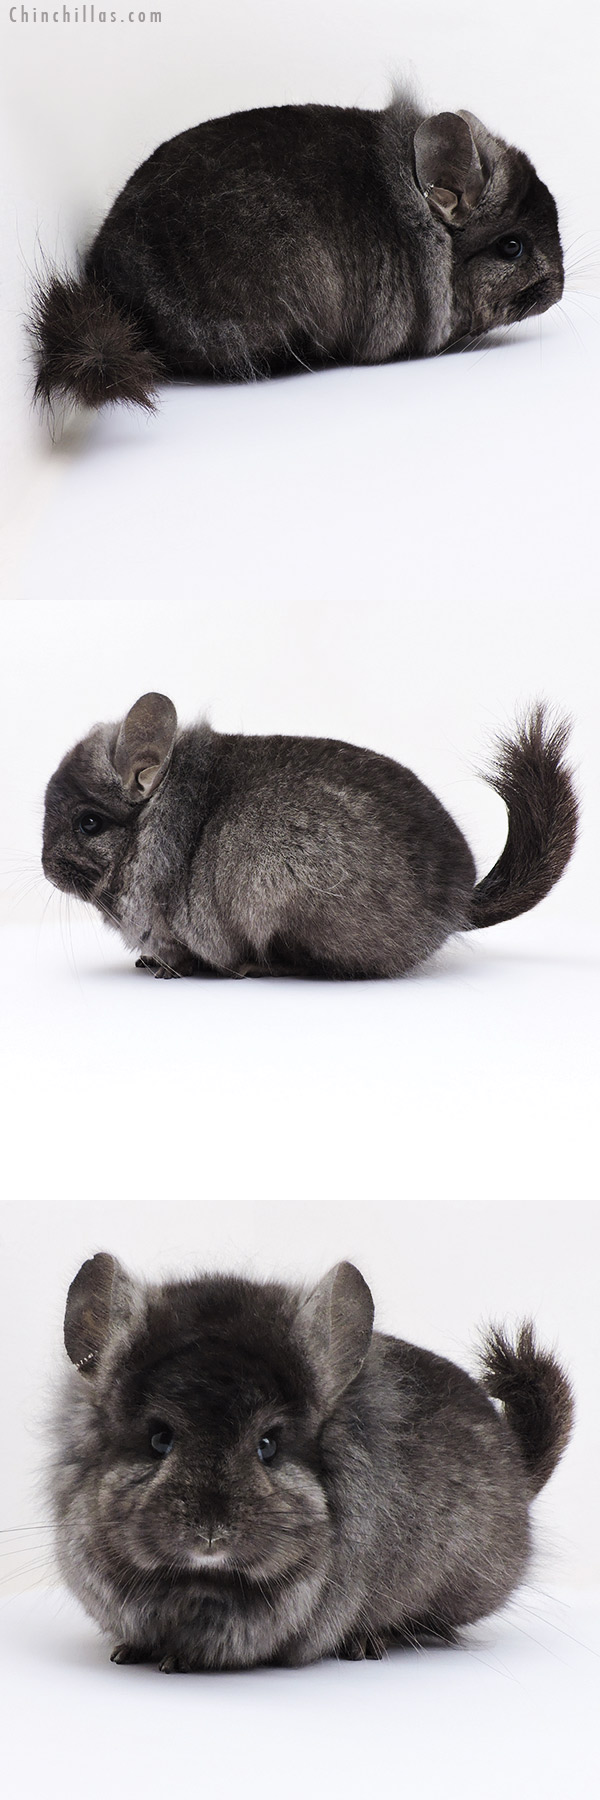 Chinchilla or related item offered for sale or export on Chinchillas.com - 18314 Blocky Ebony ( Locken Carrier )  Royal Persian Angora Male Chinchilla with Lion Mane